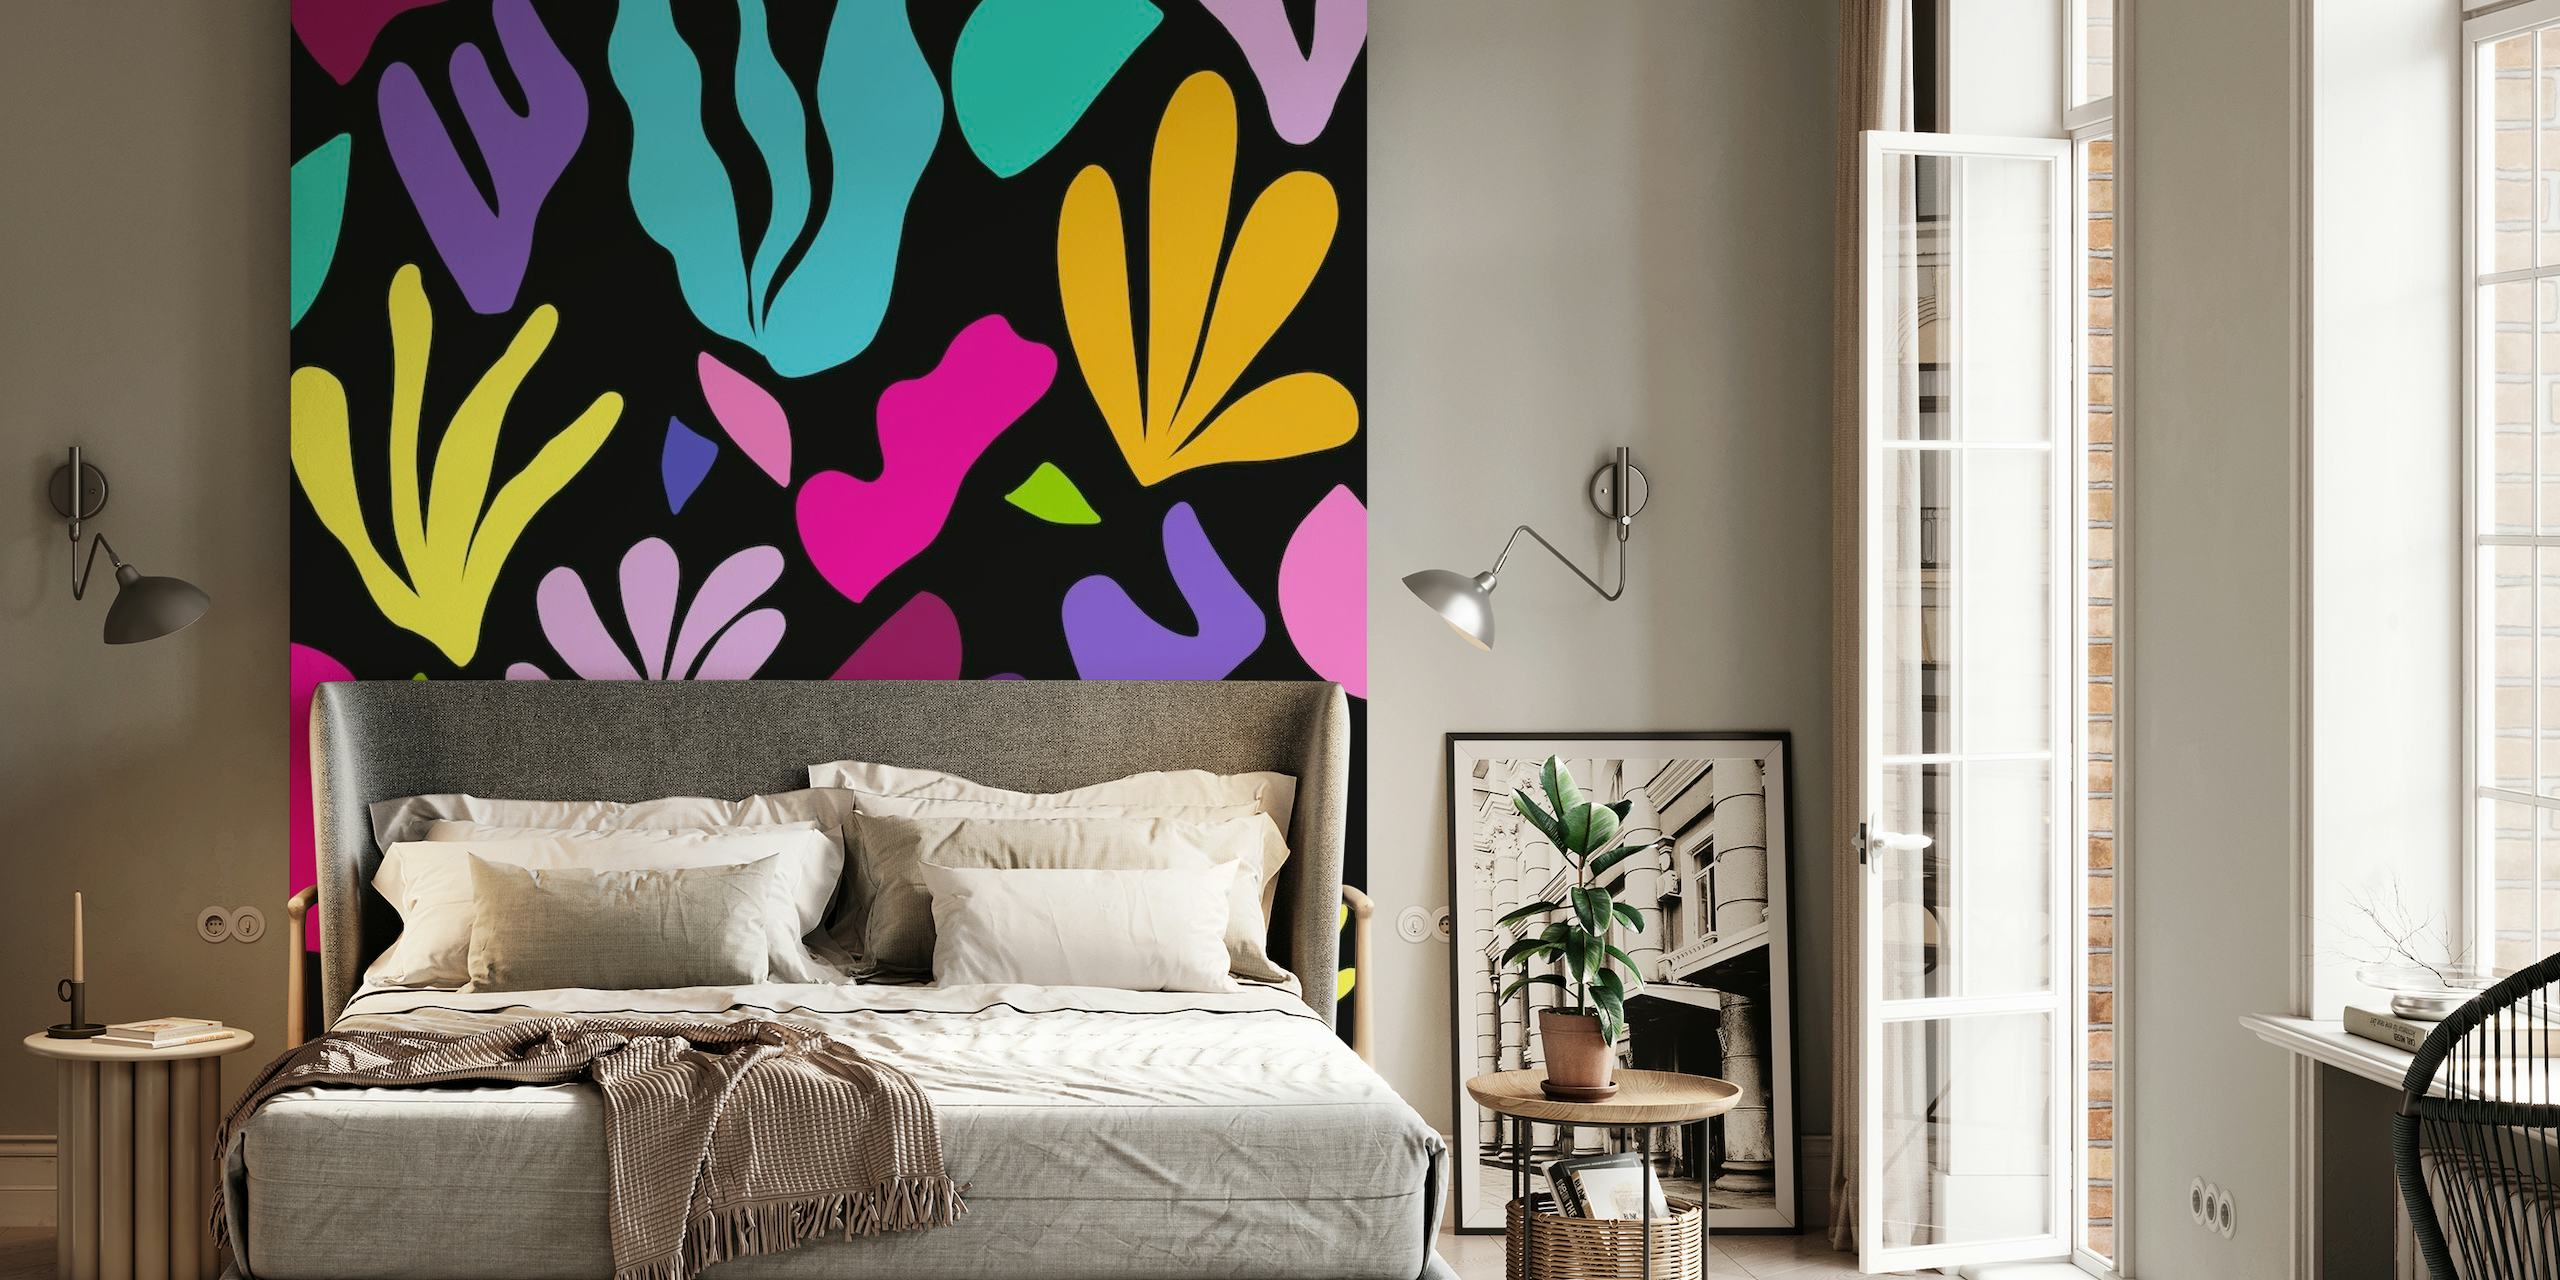 Colorful abstract seagrass and shapes wall mural on a black background